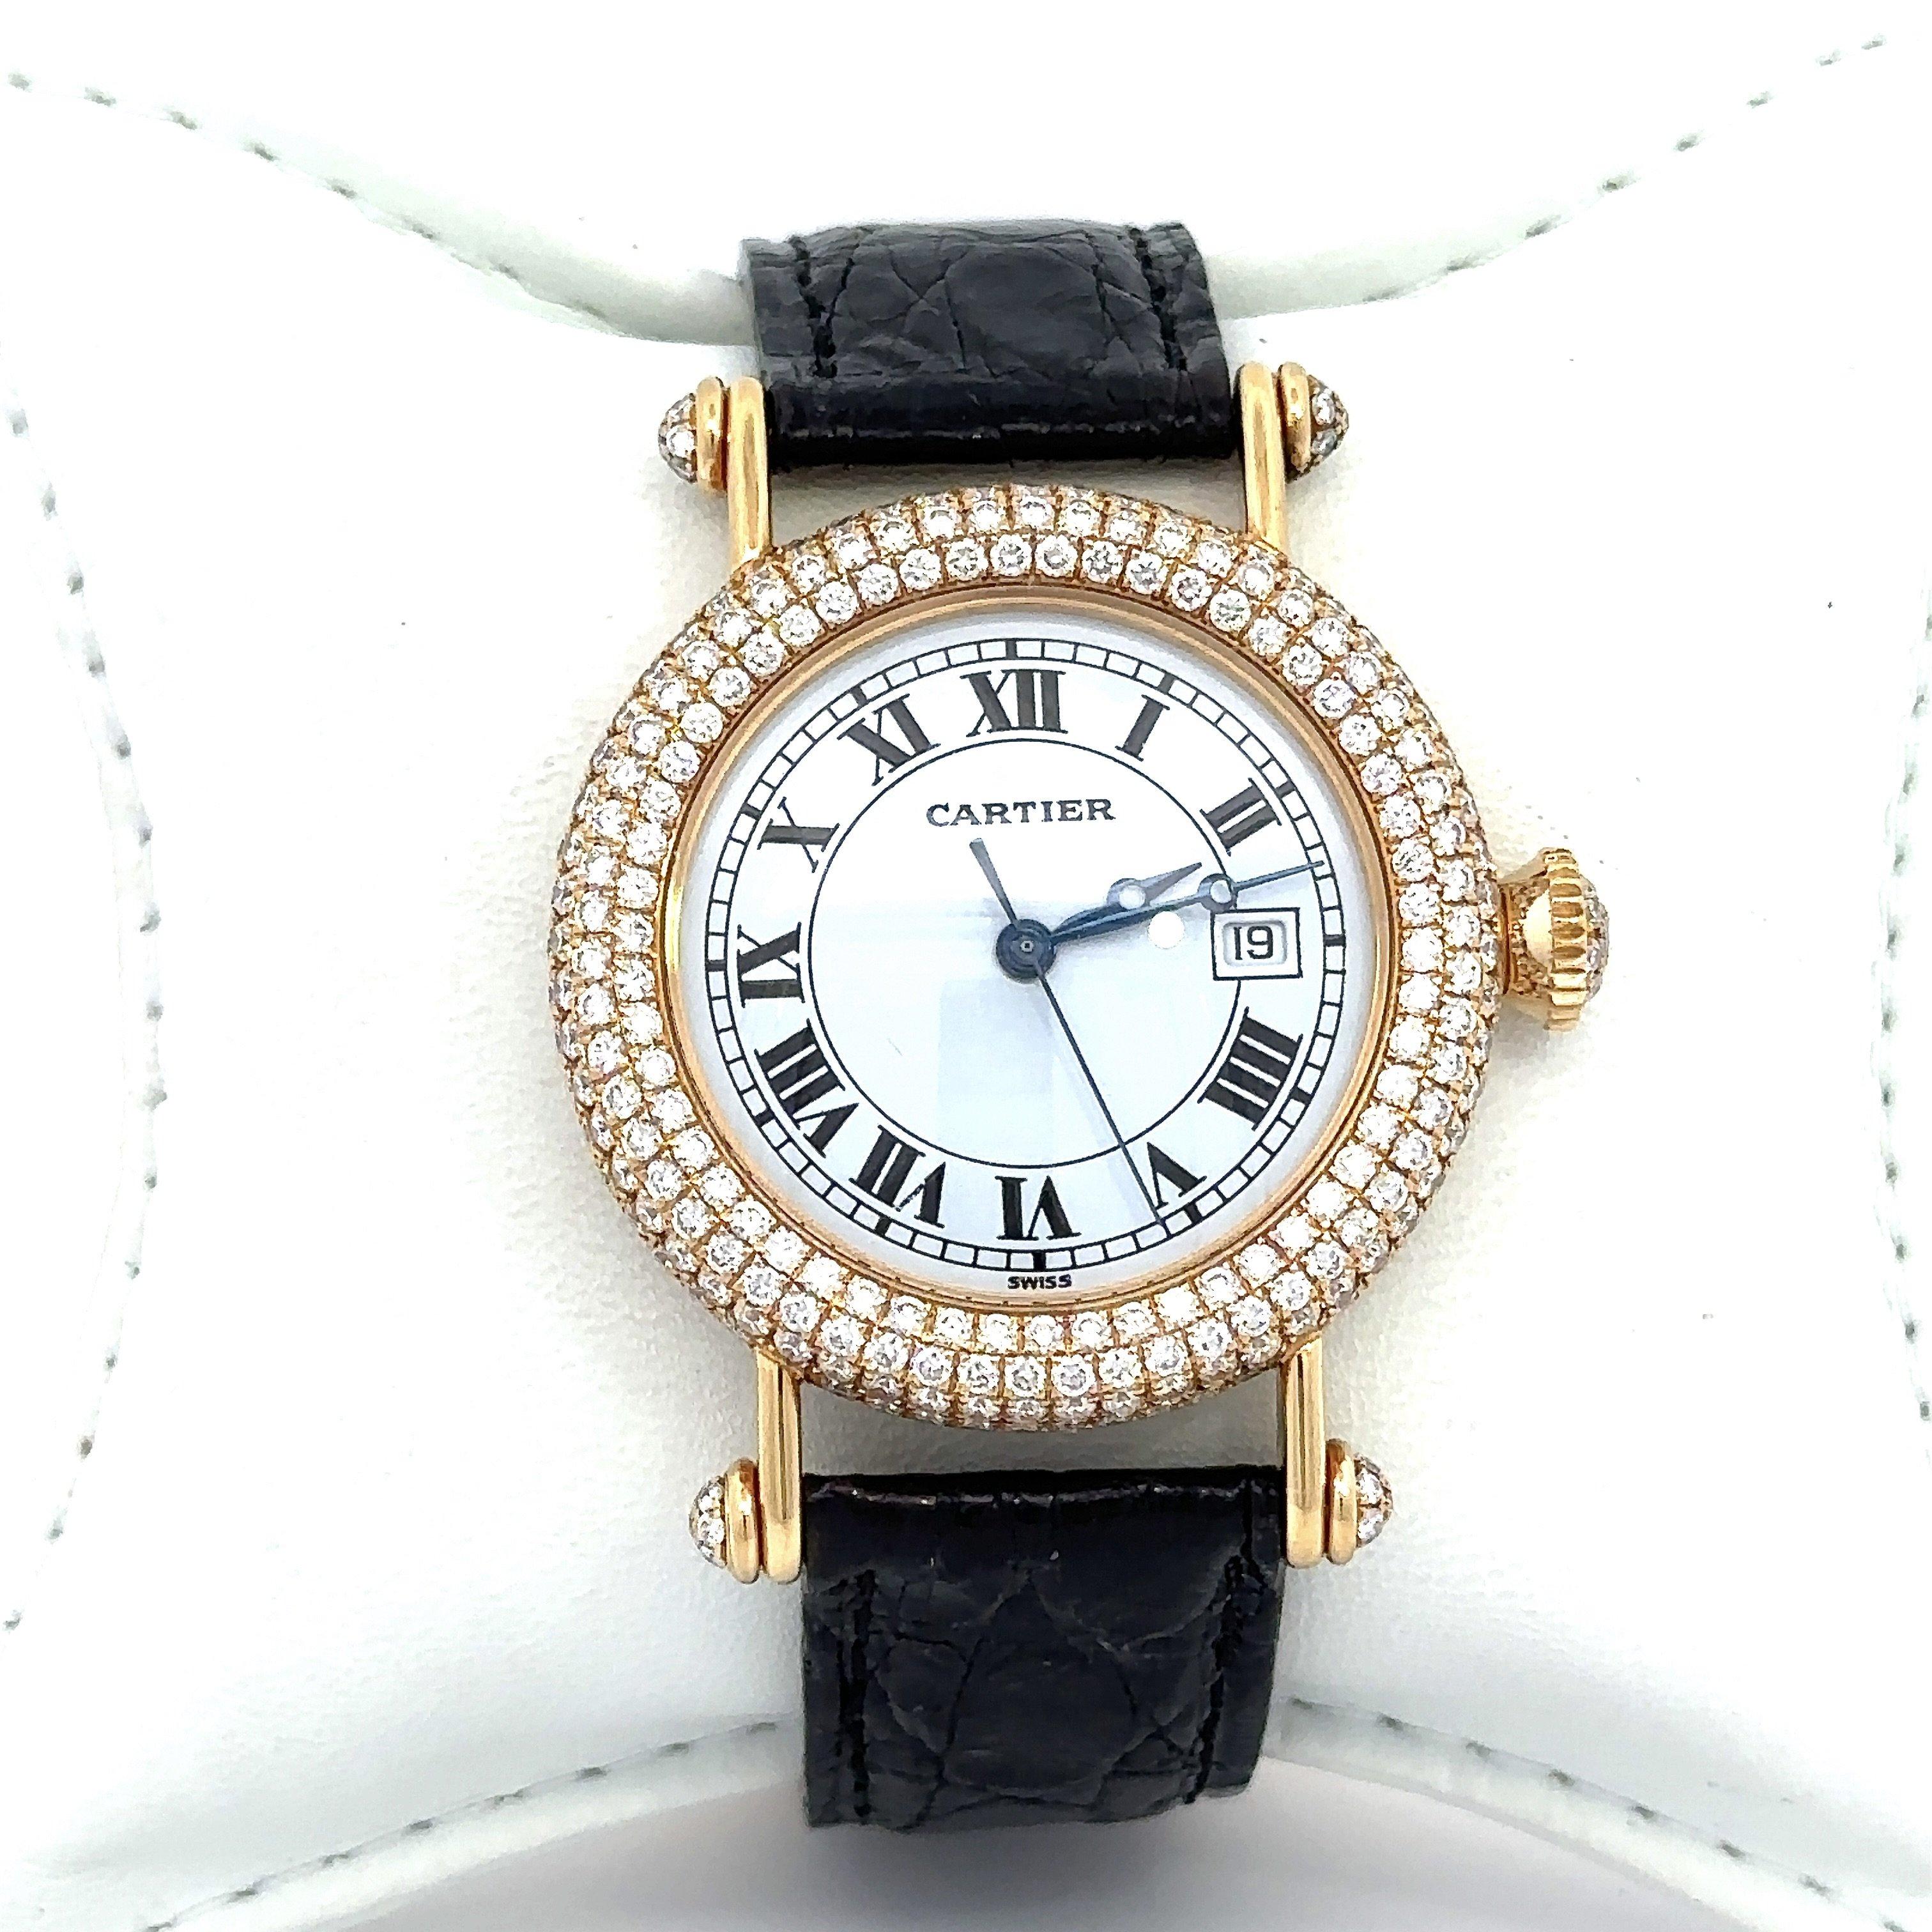 This gorgeous Cartier Diabolo wristwatch is crafted in 18KT Yellow Gold and features a quartz movement. It has an elegant white dial with roman numerals, and a date window. The dial is encircled by sparkling round diamonds, with diamonds also